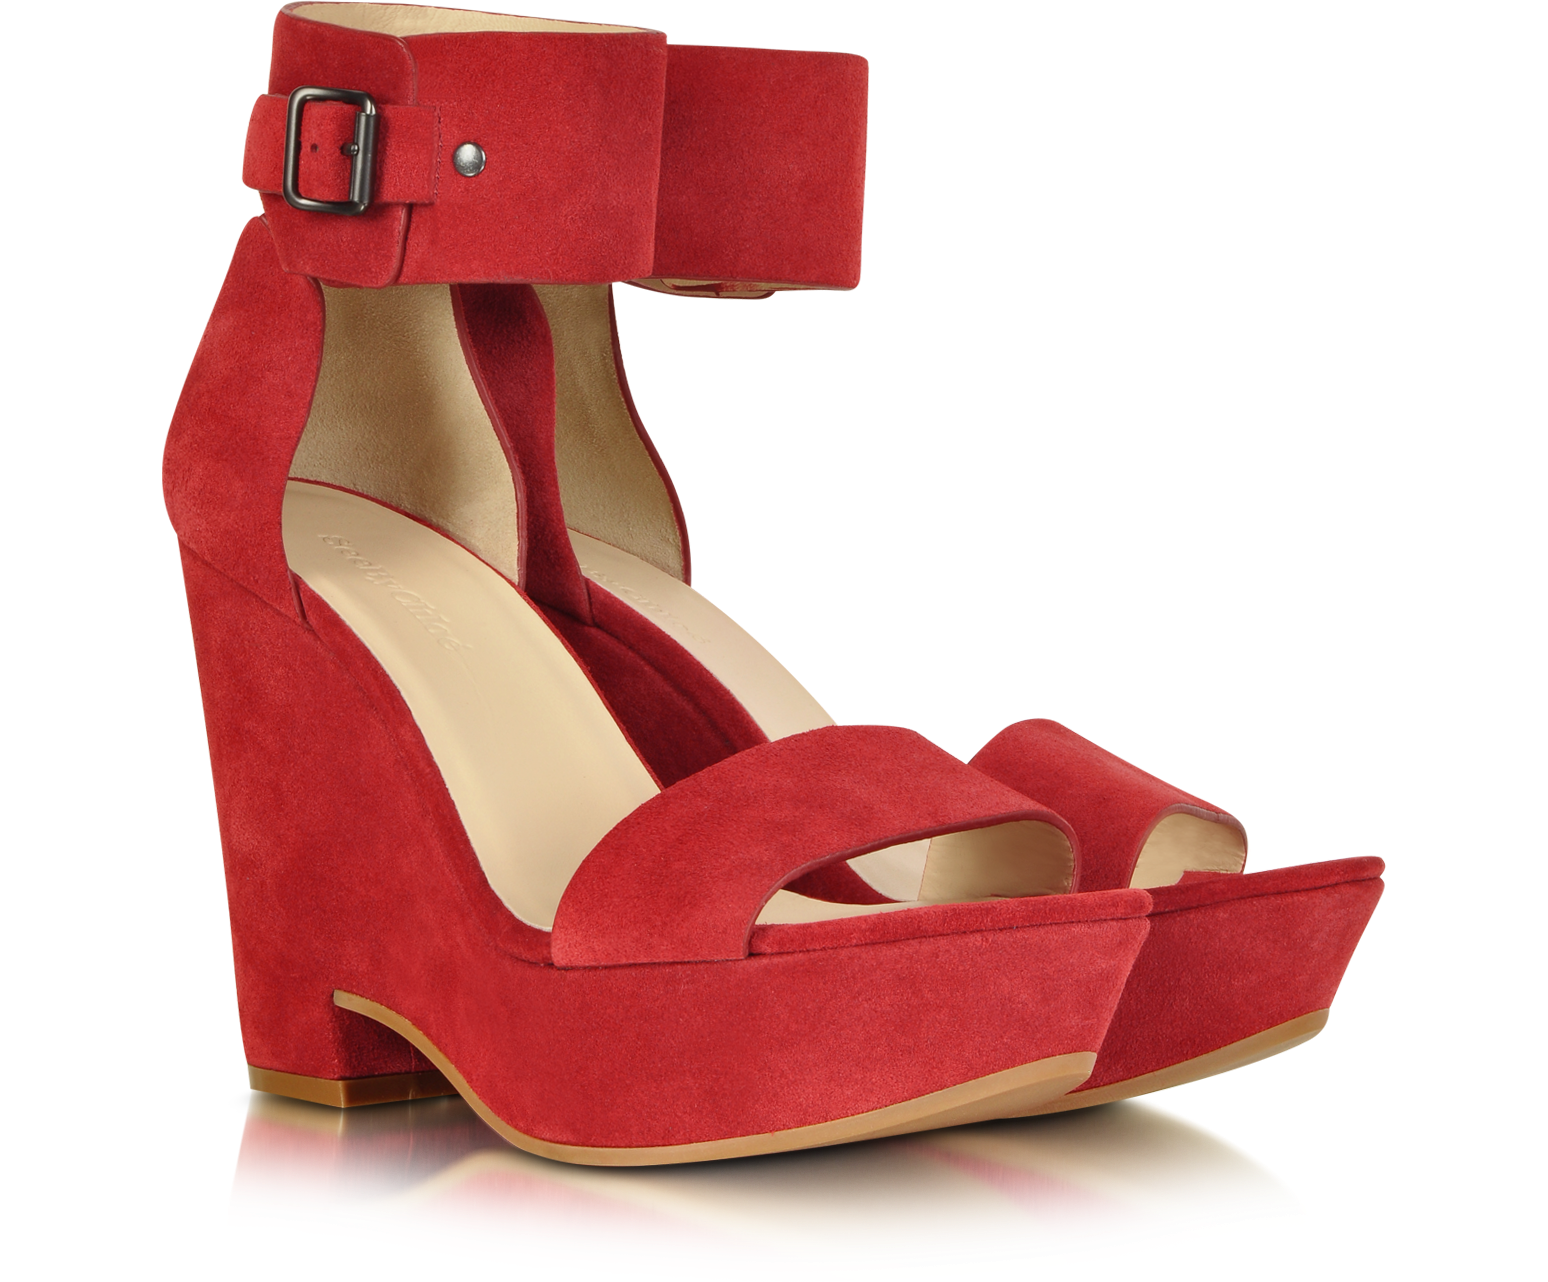 See by Chloé Eva Red Suede Wedge Sandal 36 IT/EU at FORZIERI